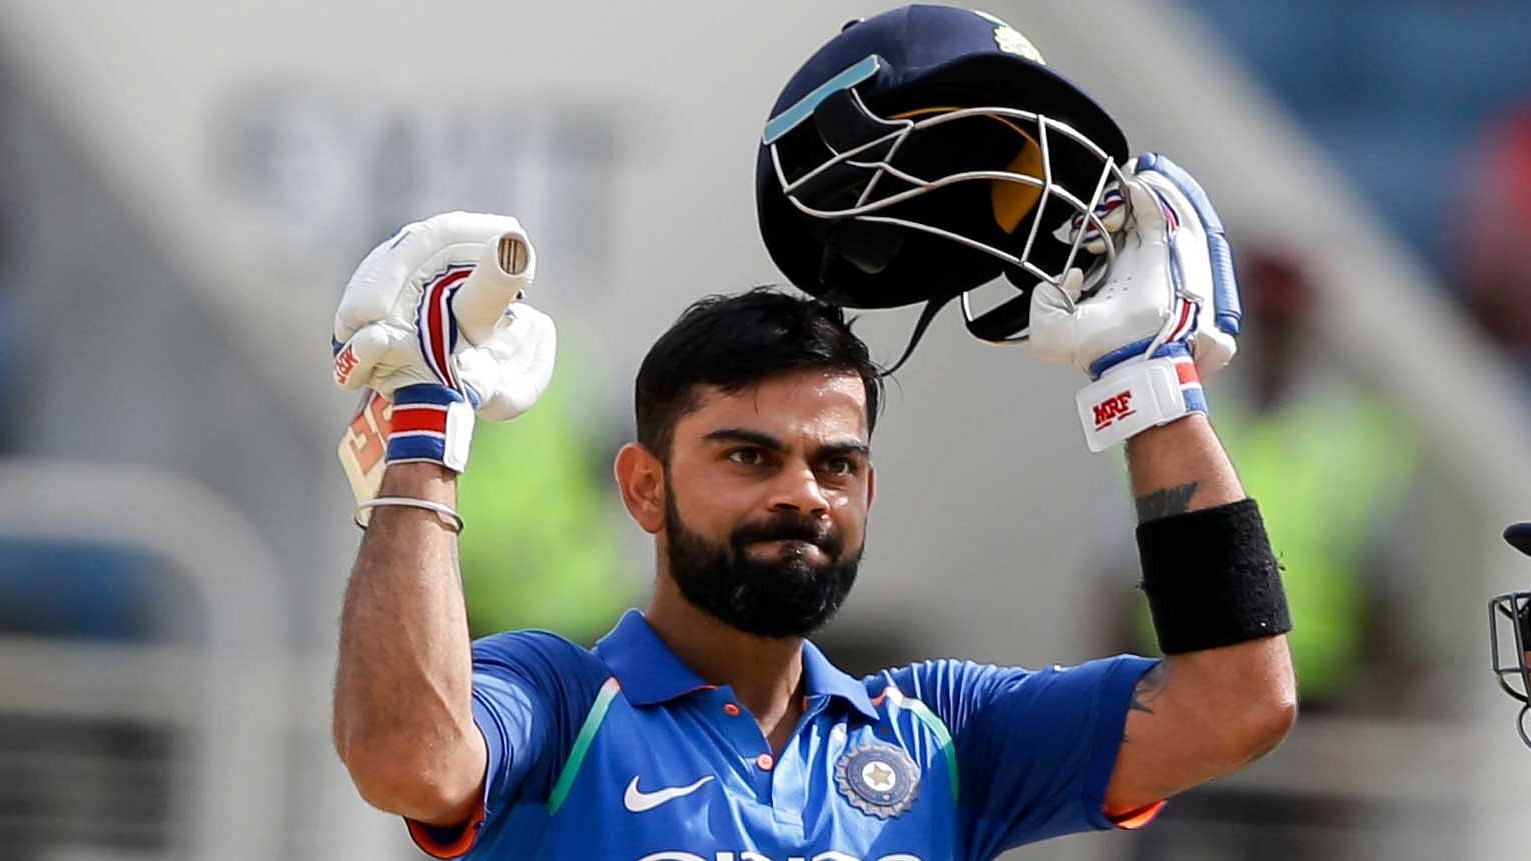 India cricket captain Virat Kohli says he couldn’t have asked for more as he completes the 11th year of a stellar international career.